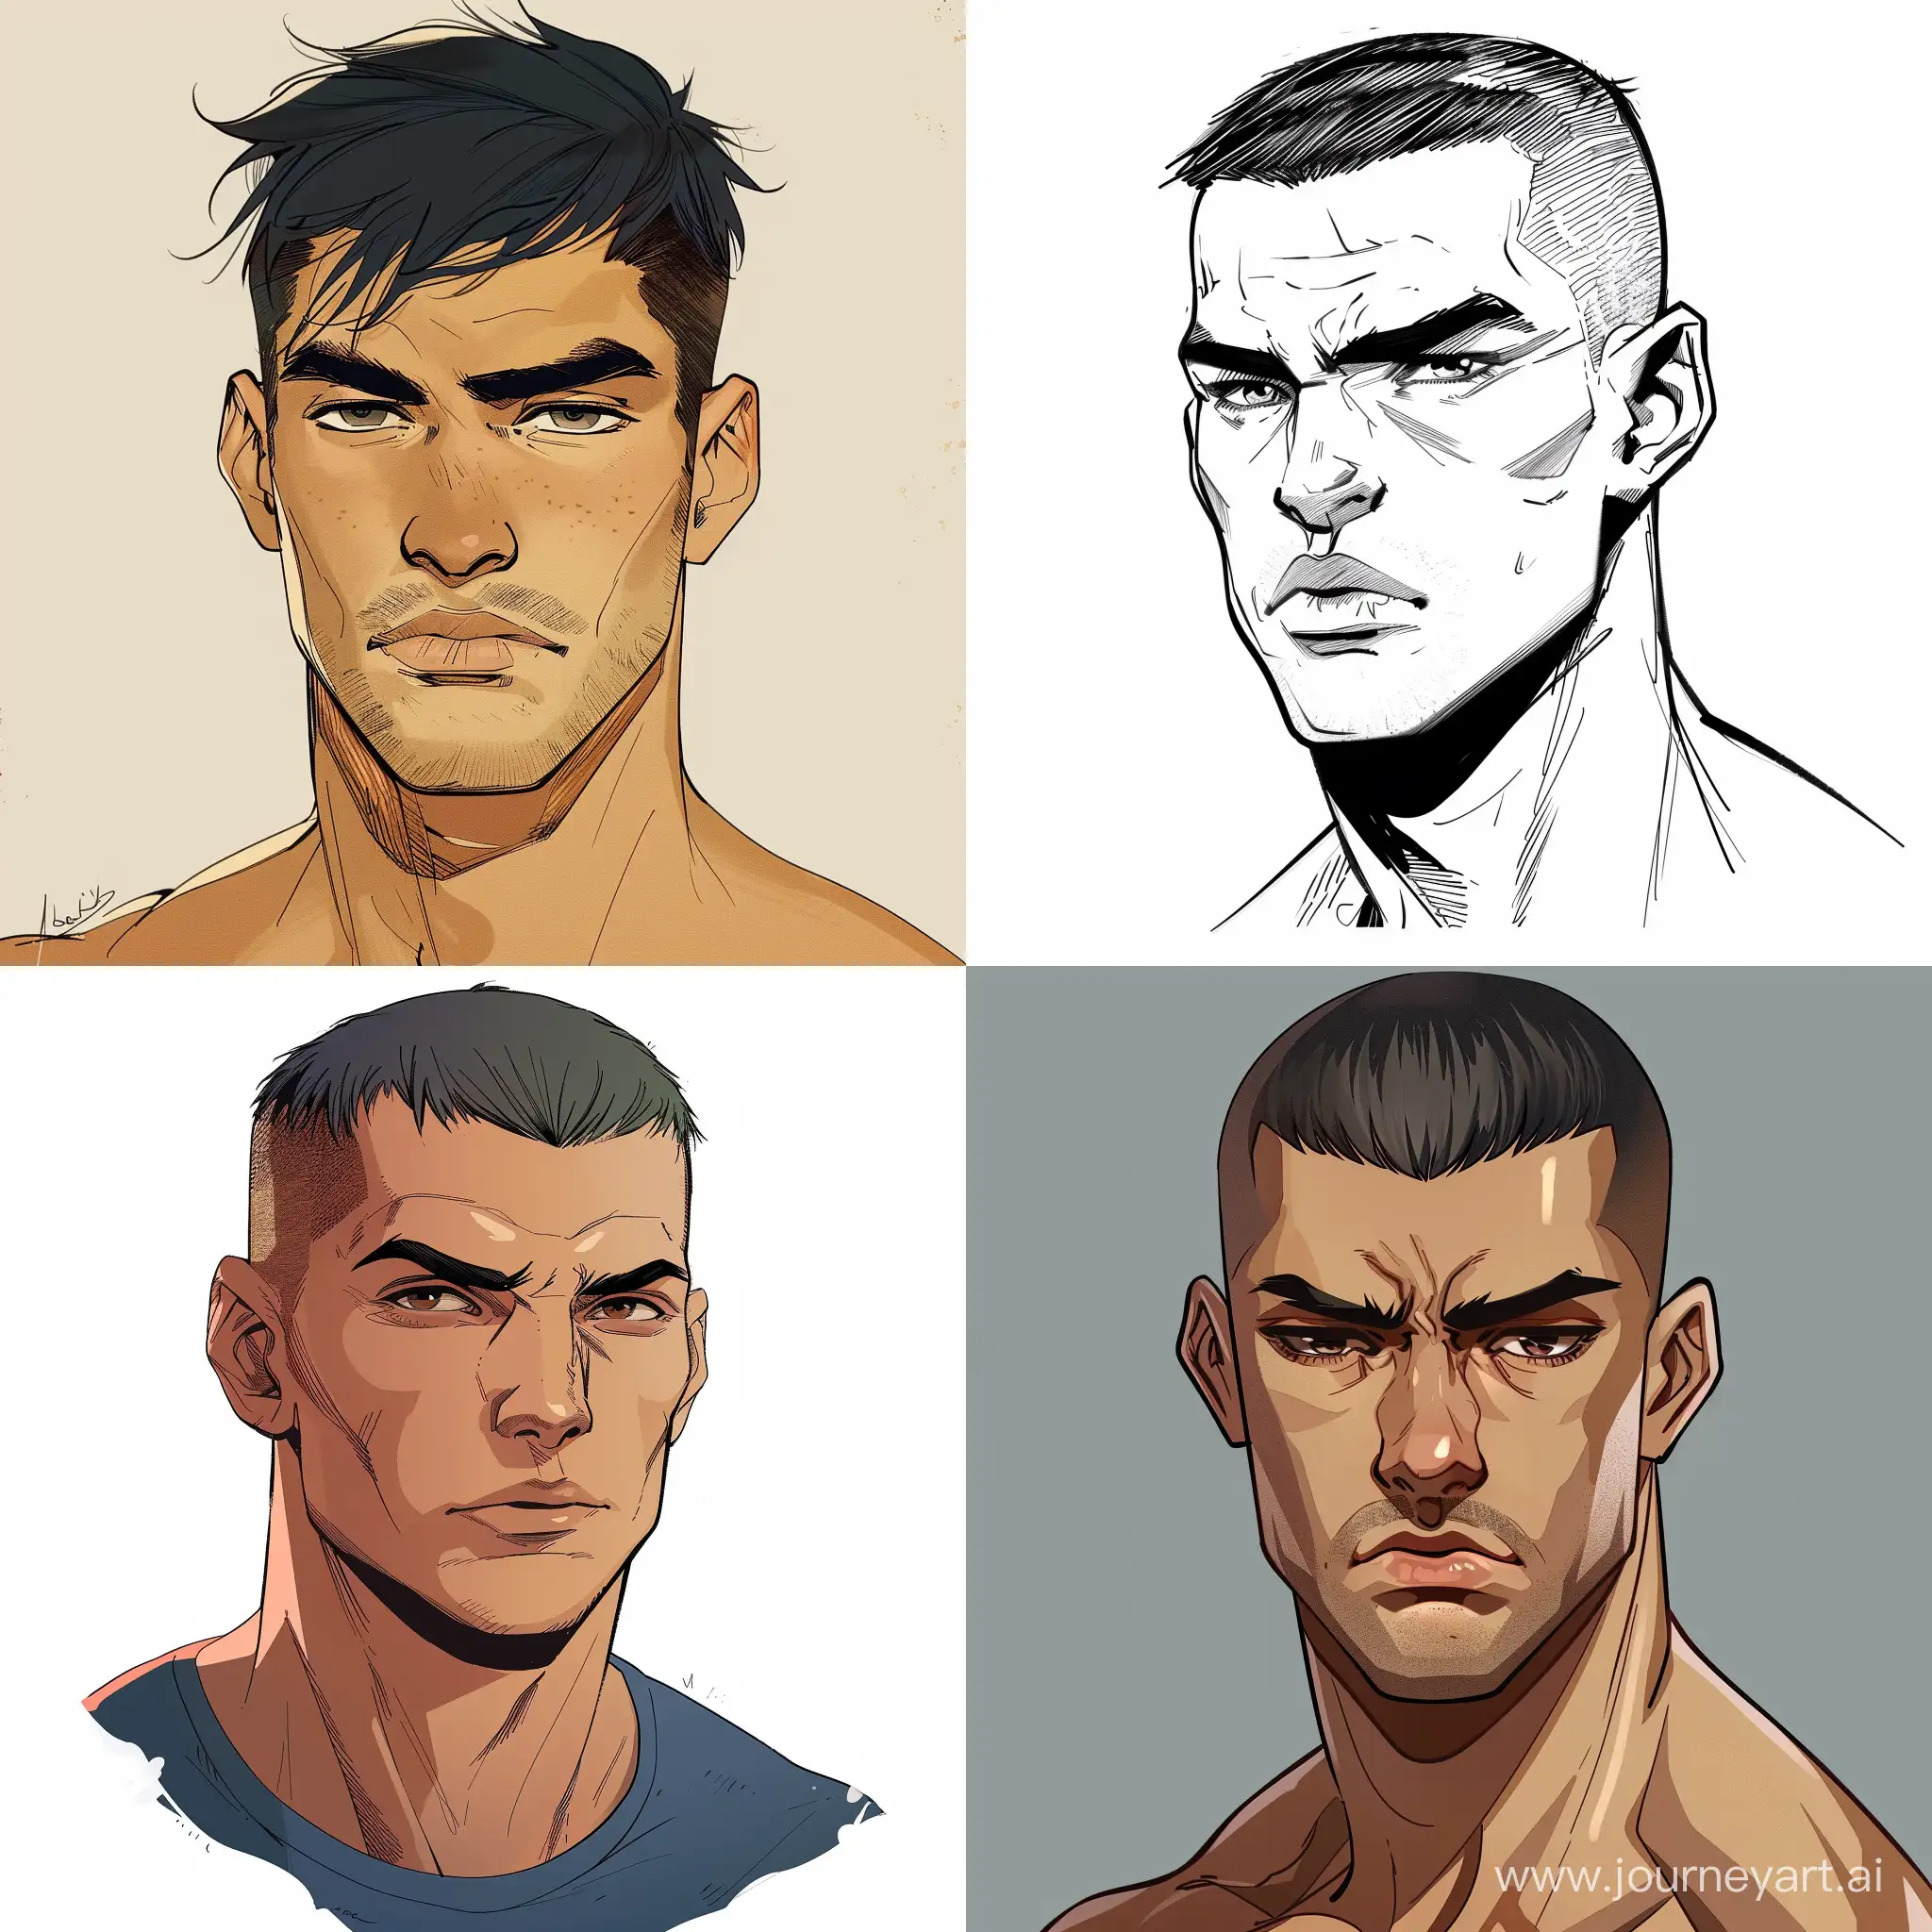 a handsome guy about 25 years old with dark hair, he is almost bald, he has very short hair in the style of comics